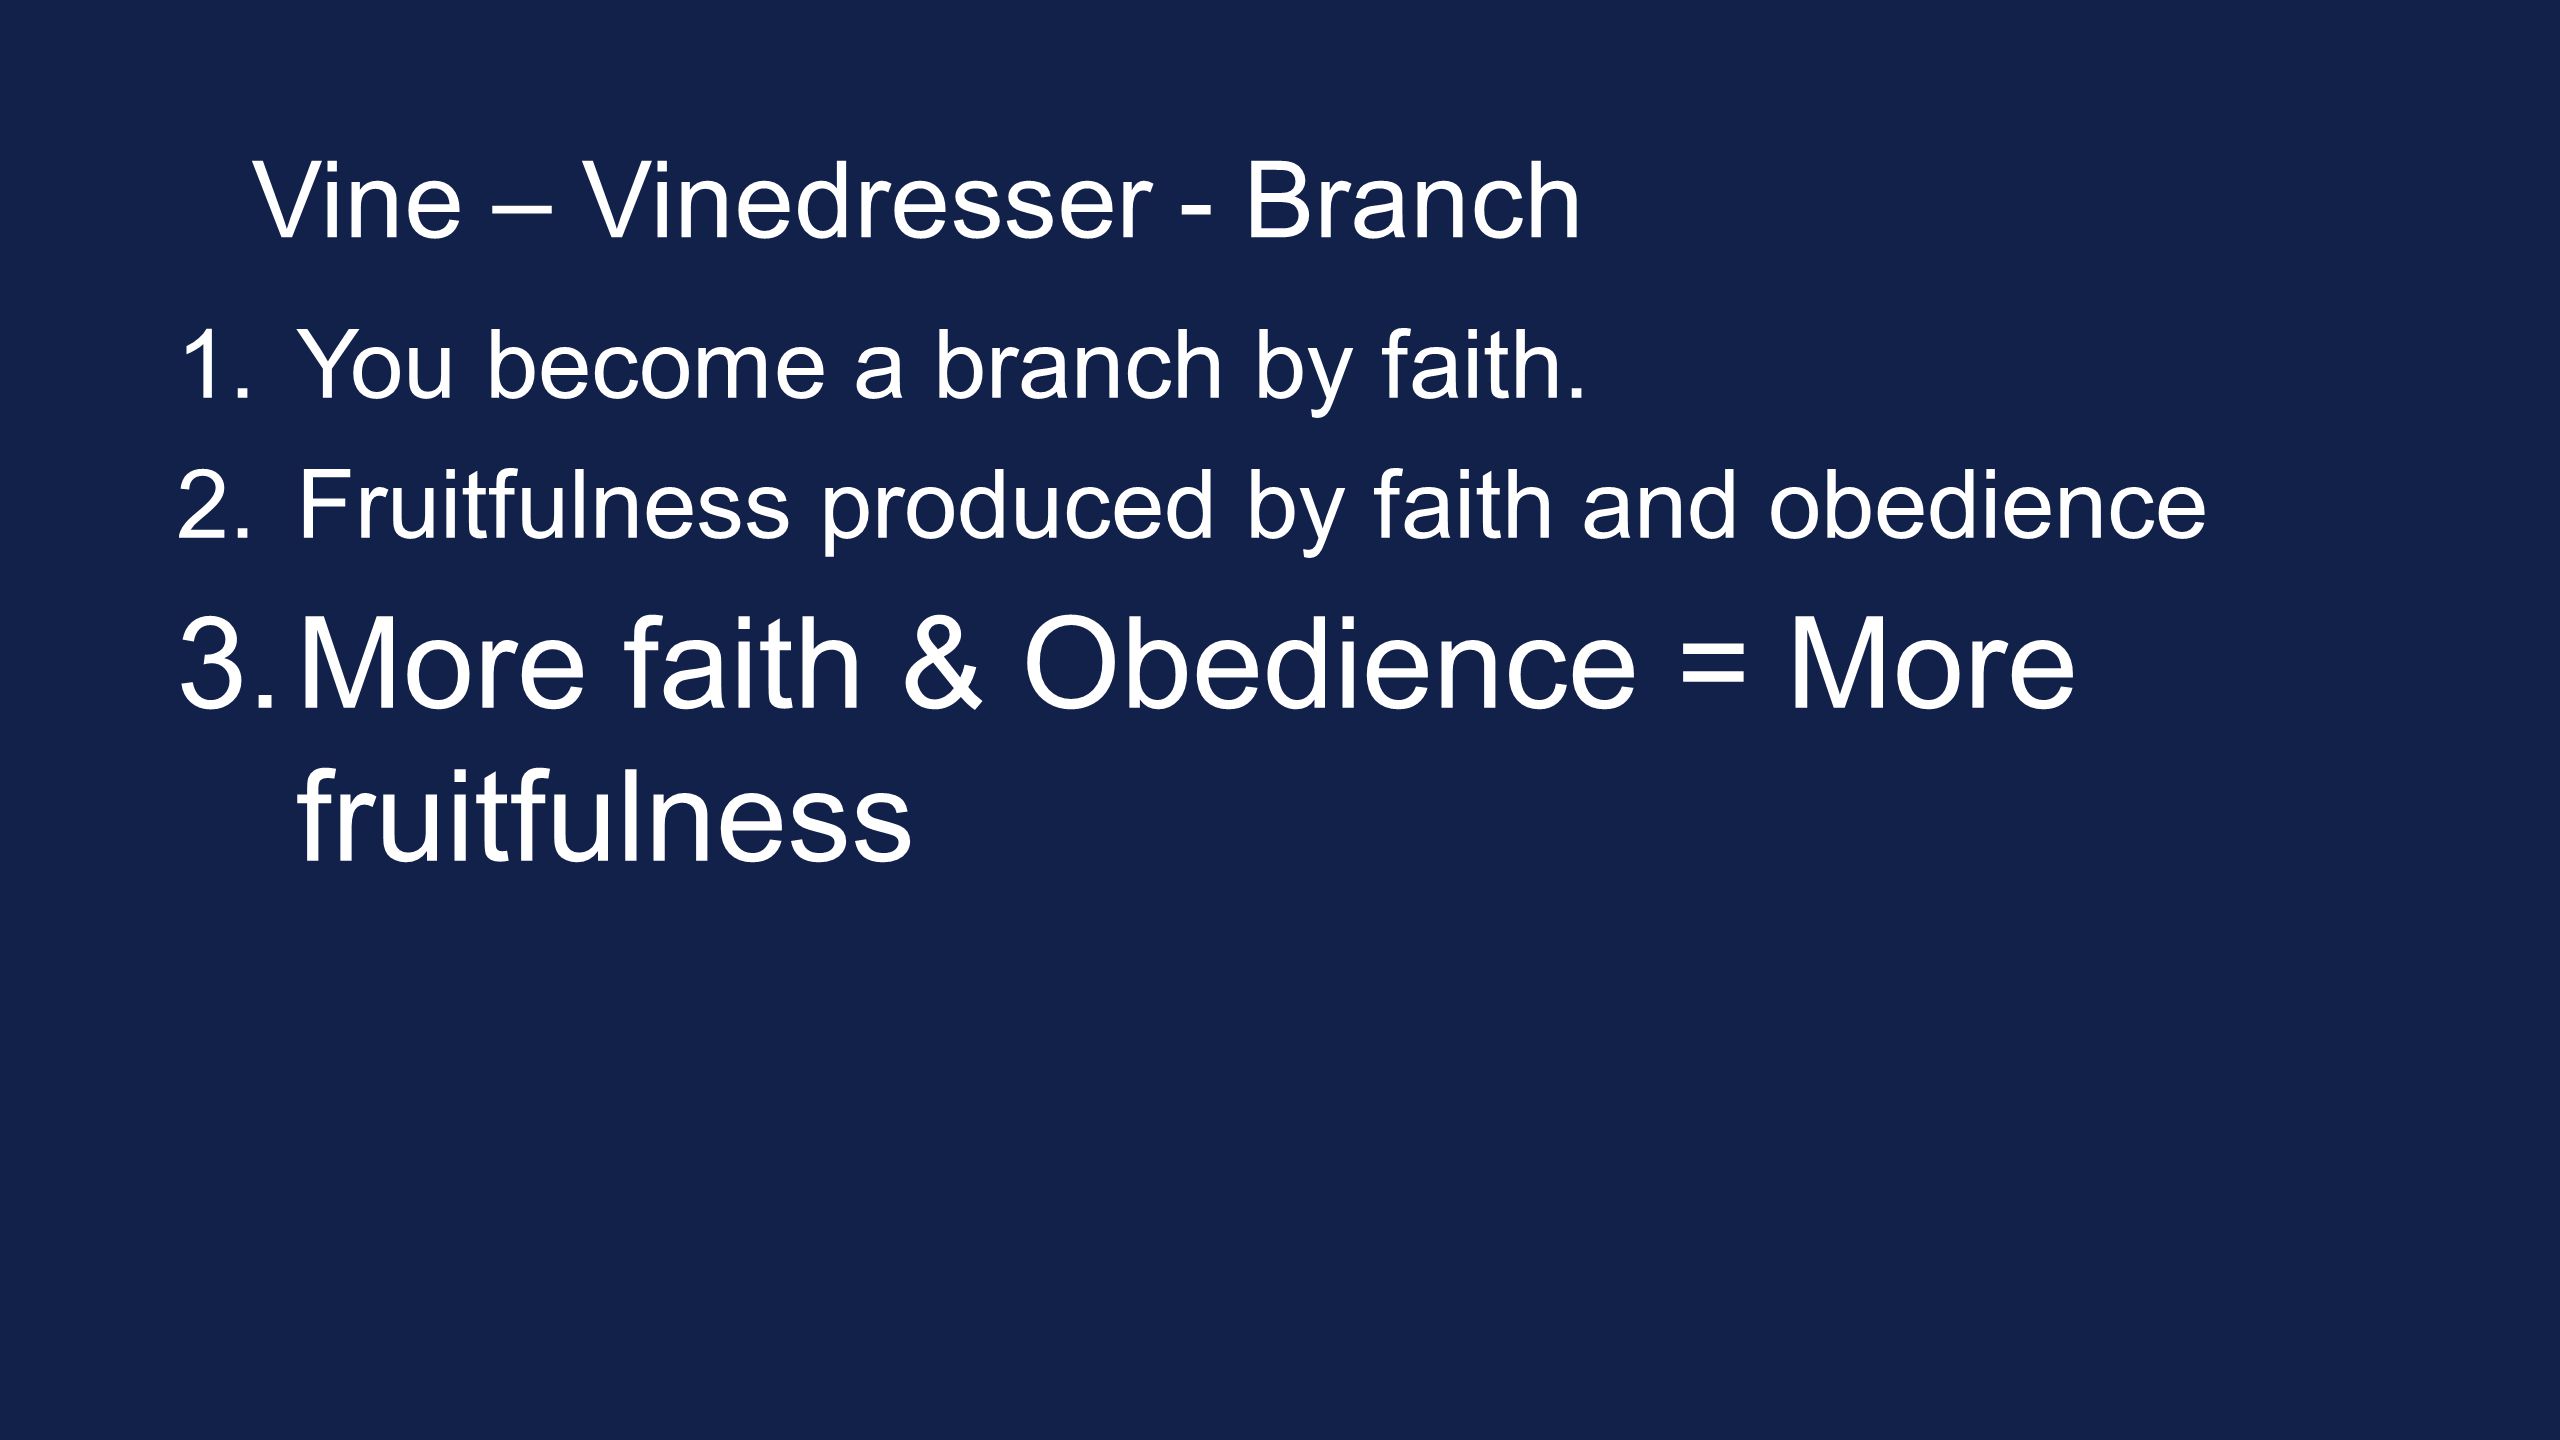 Vine – Vinedresser - Branch 1.You become a branch by faith.